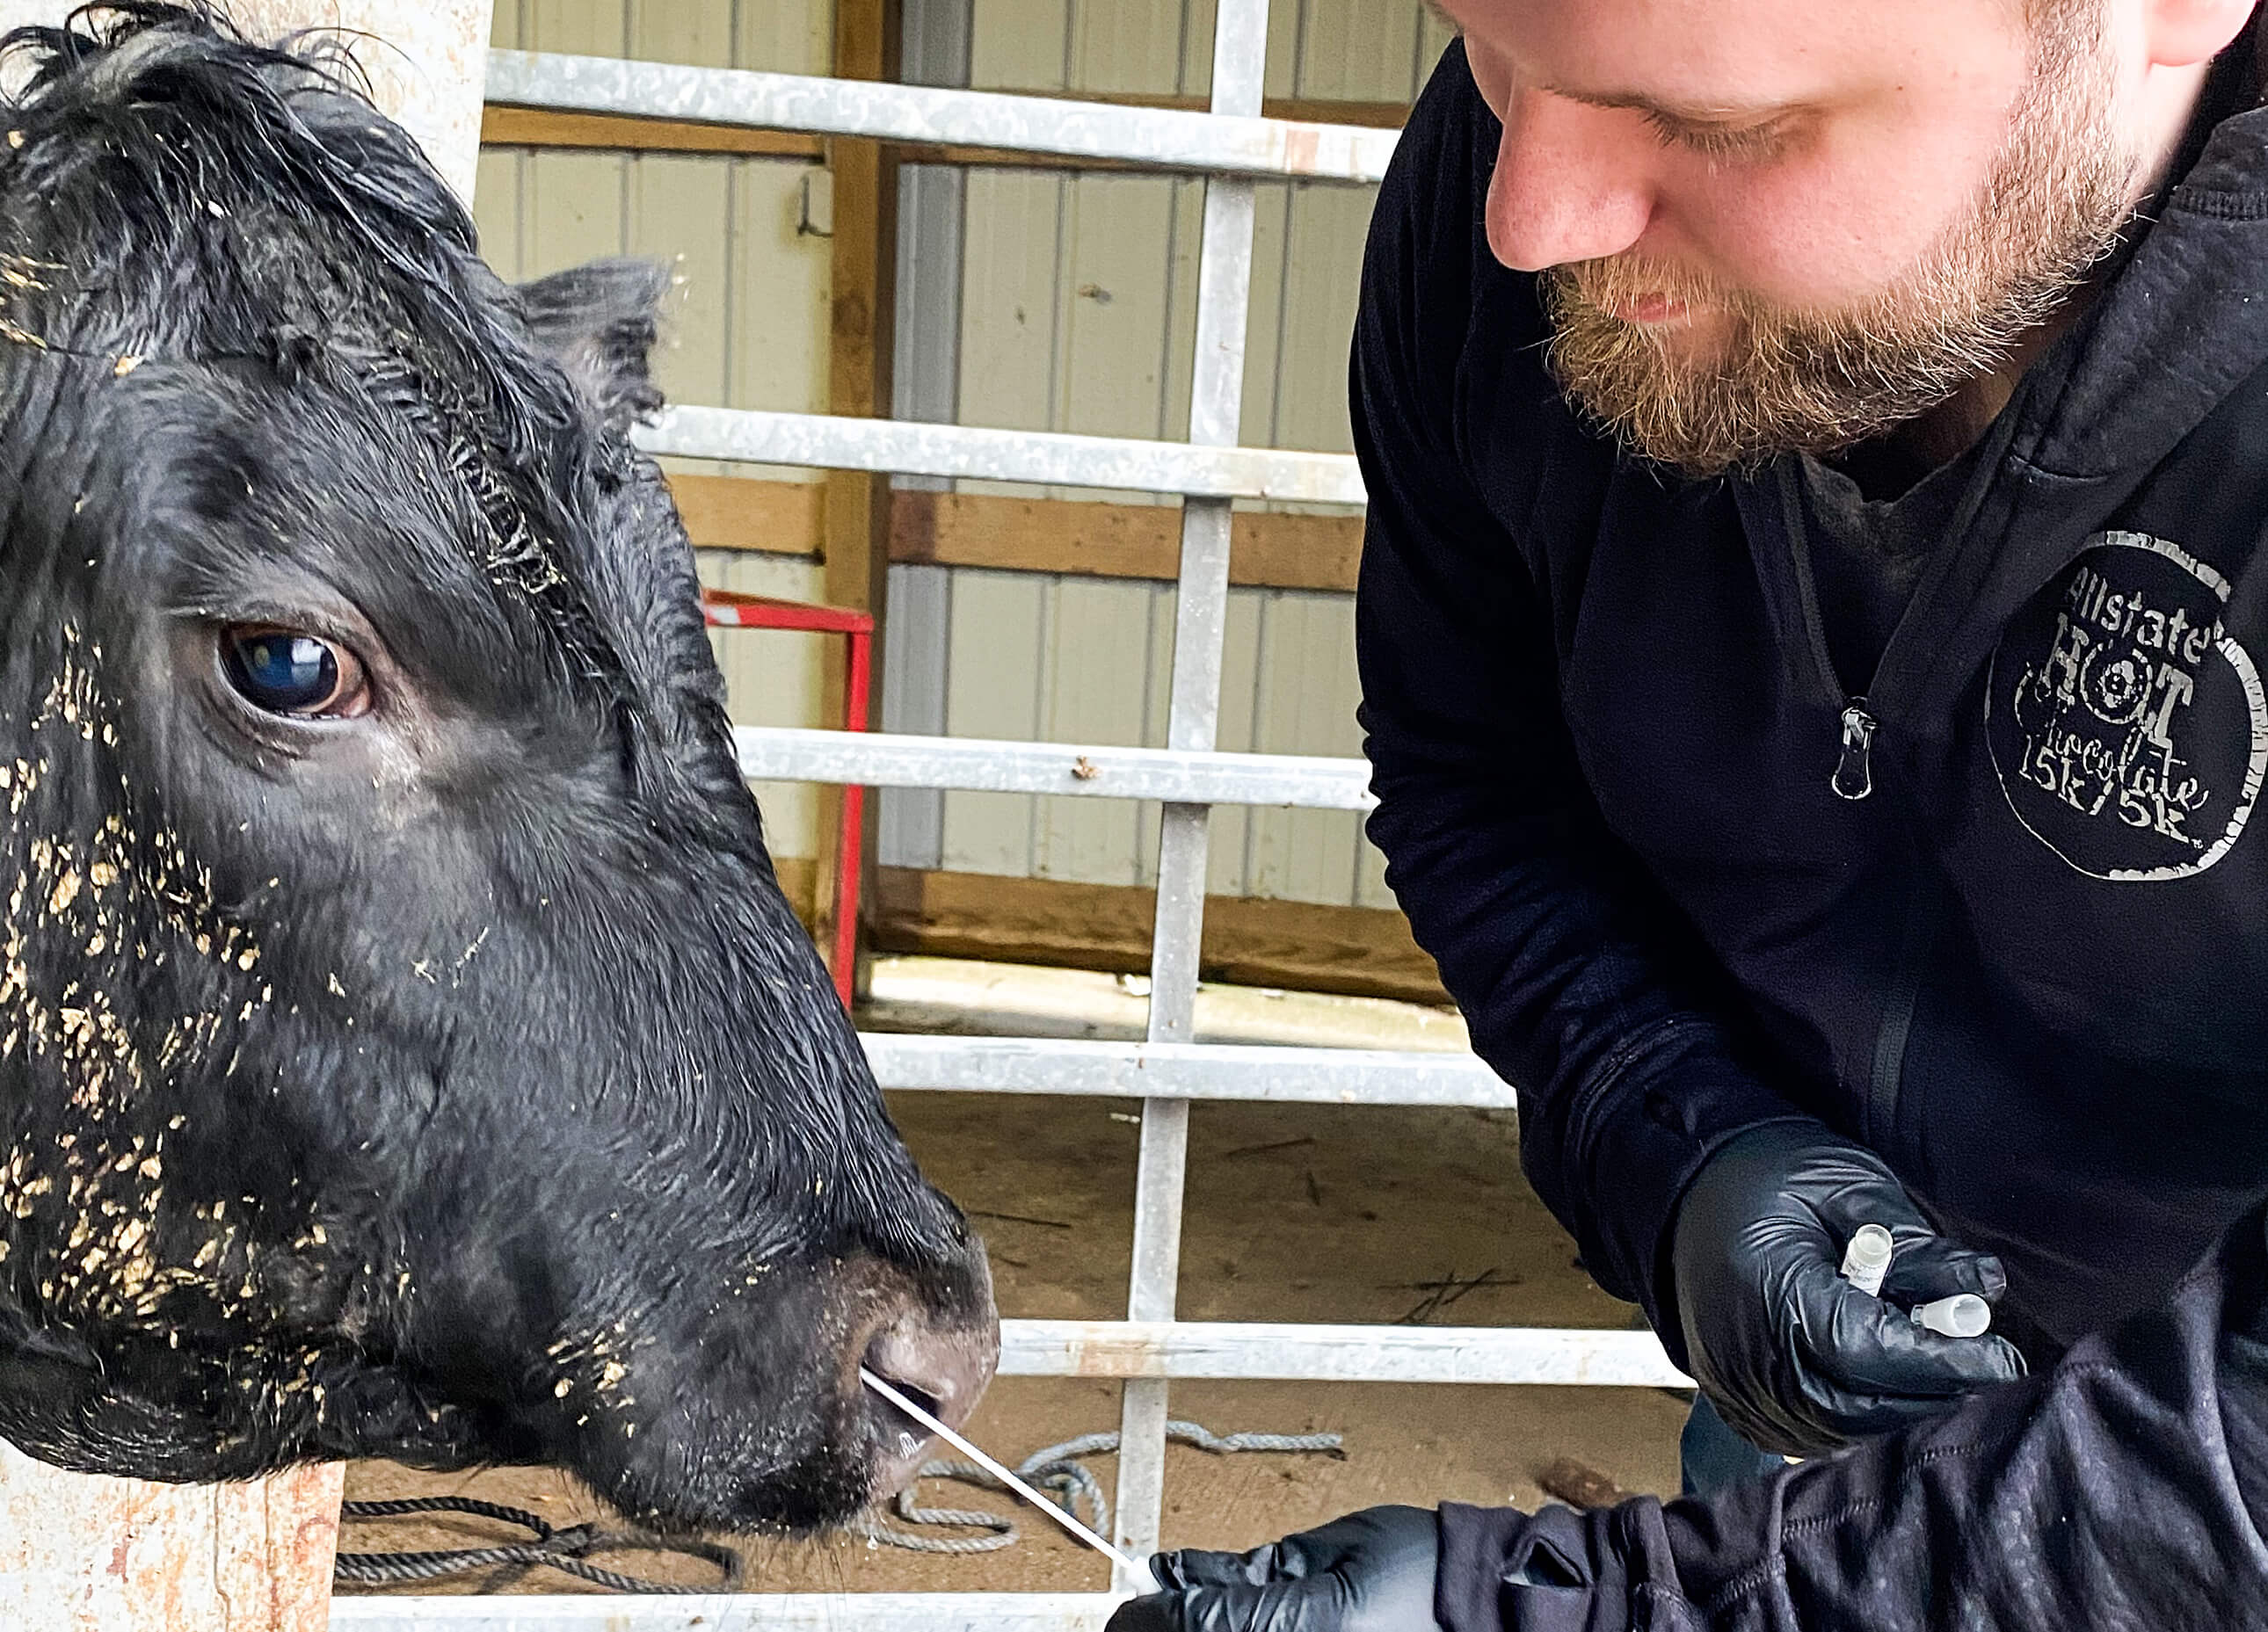 Josiah Davidson, a graduate student in Mohit Verma's Purdue University lab, collects a nasal swab from a calf to test for bovine respiratory disease. Verma received a $1 million U.S. Department of Agriculture grant to develop a biosensor that will rapidly test for the costly cattle disease. (Photo courtesy Suraj Mohan)